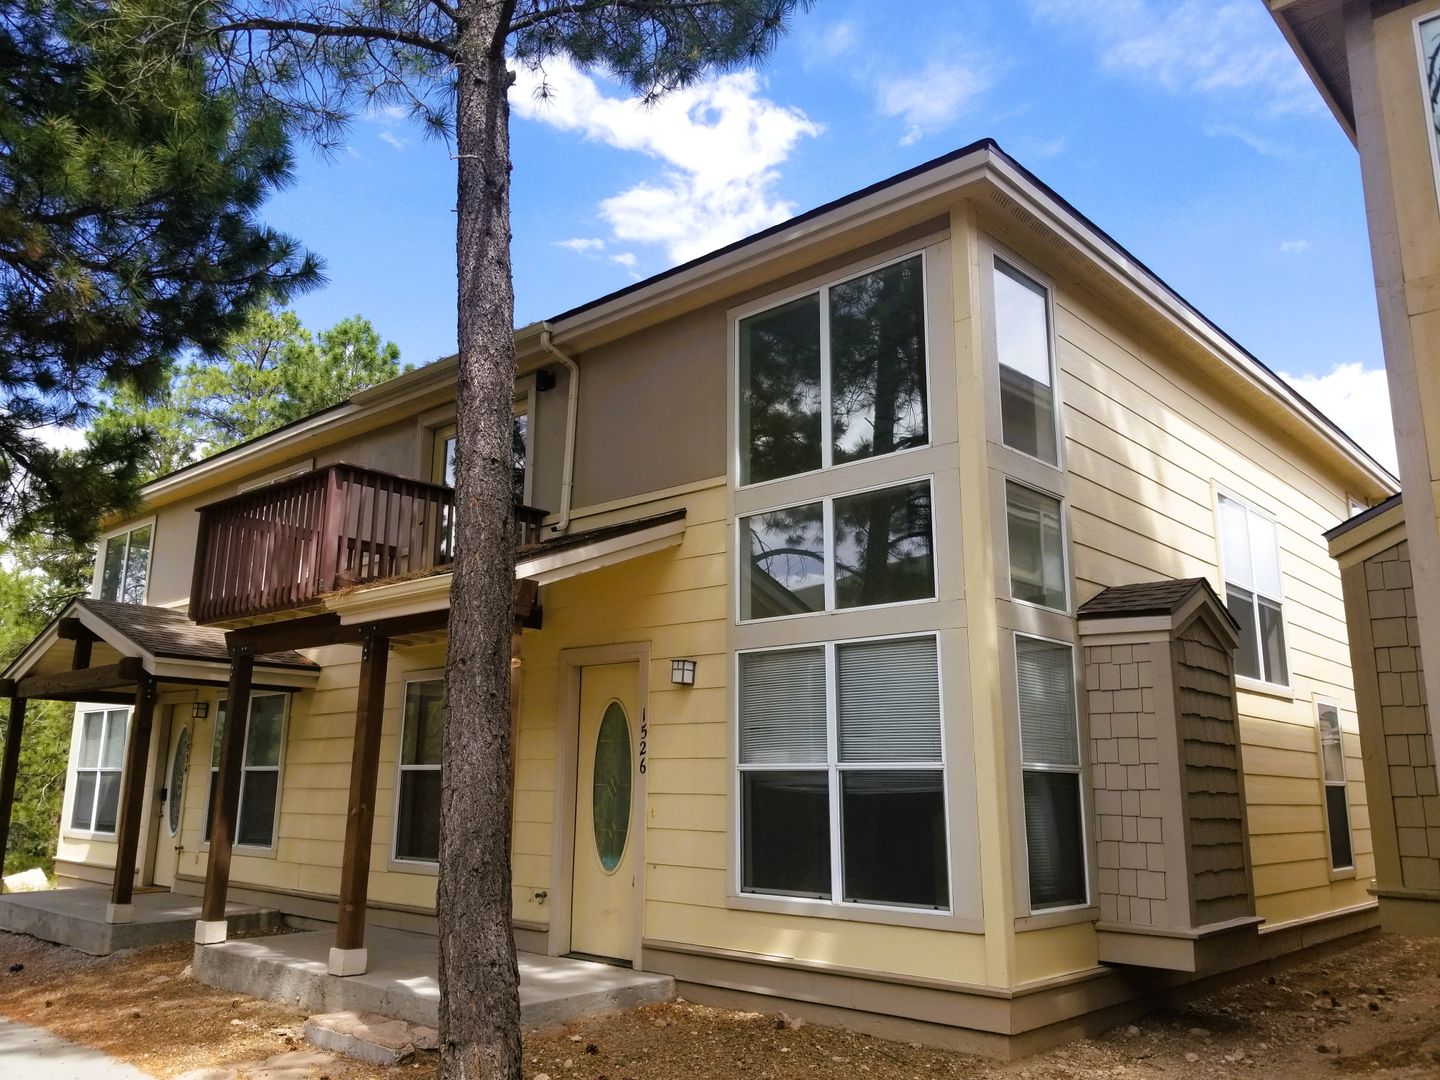 Westside 4 Bed, 2.75 Bath Townhouse w/Garage Next to NAU & CCC! May 1st!